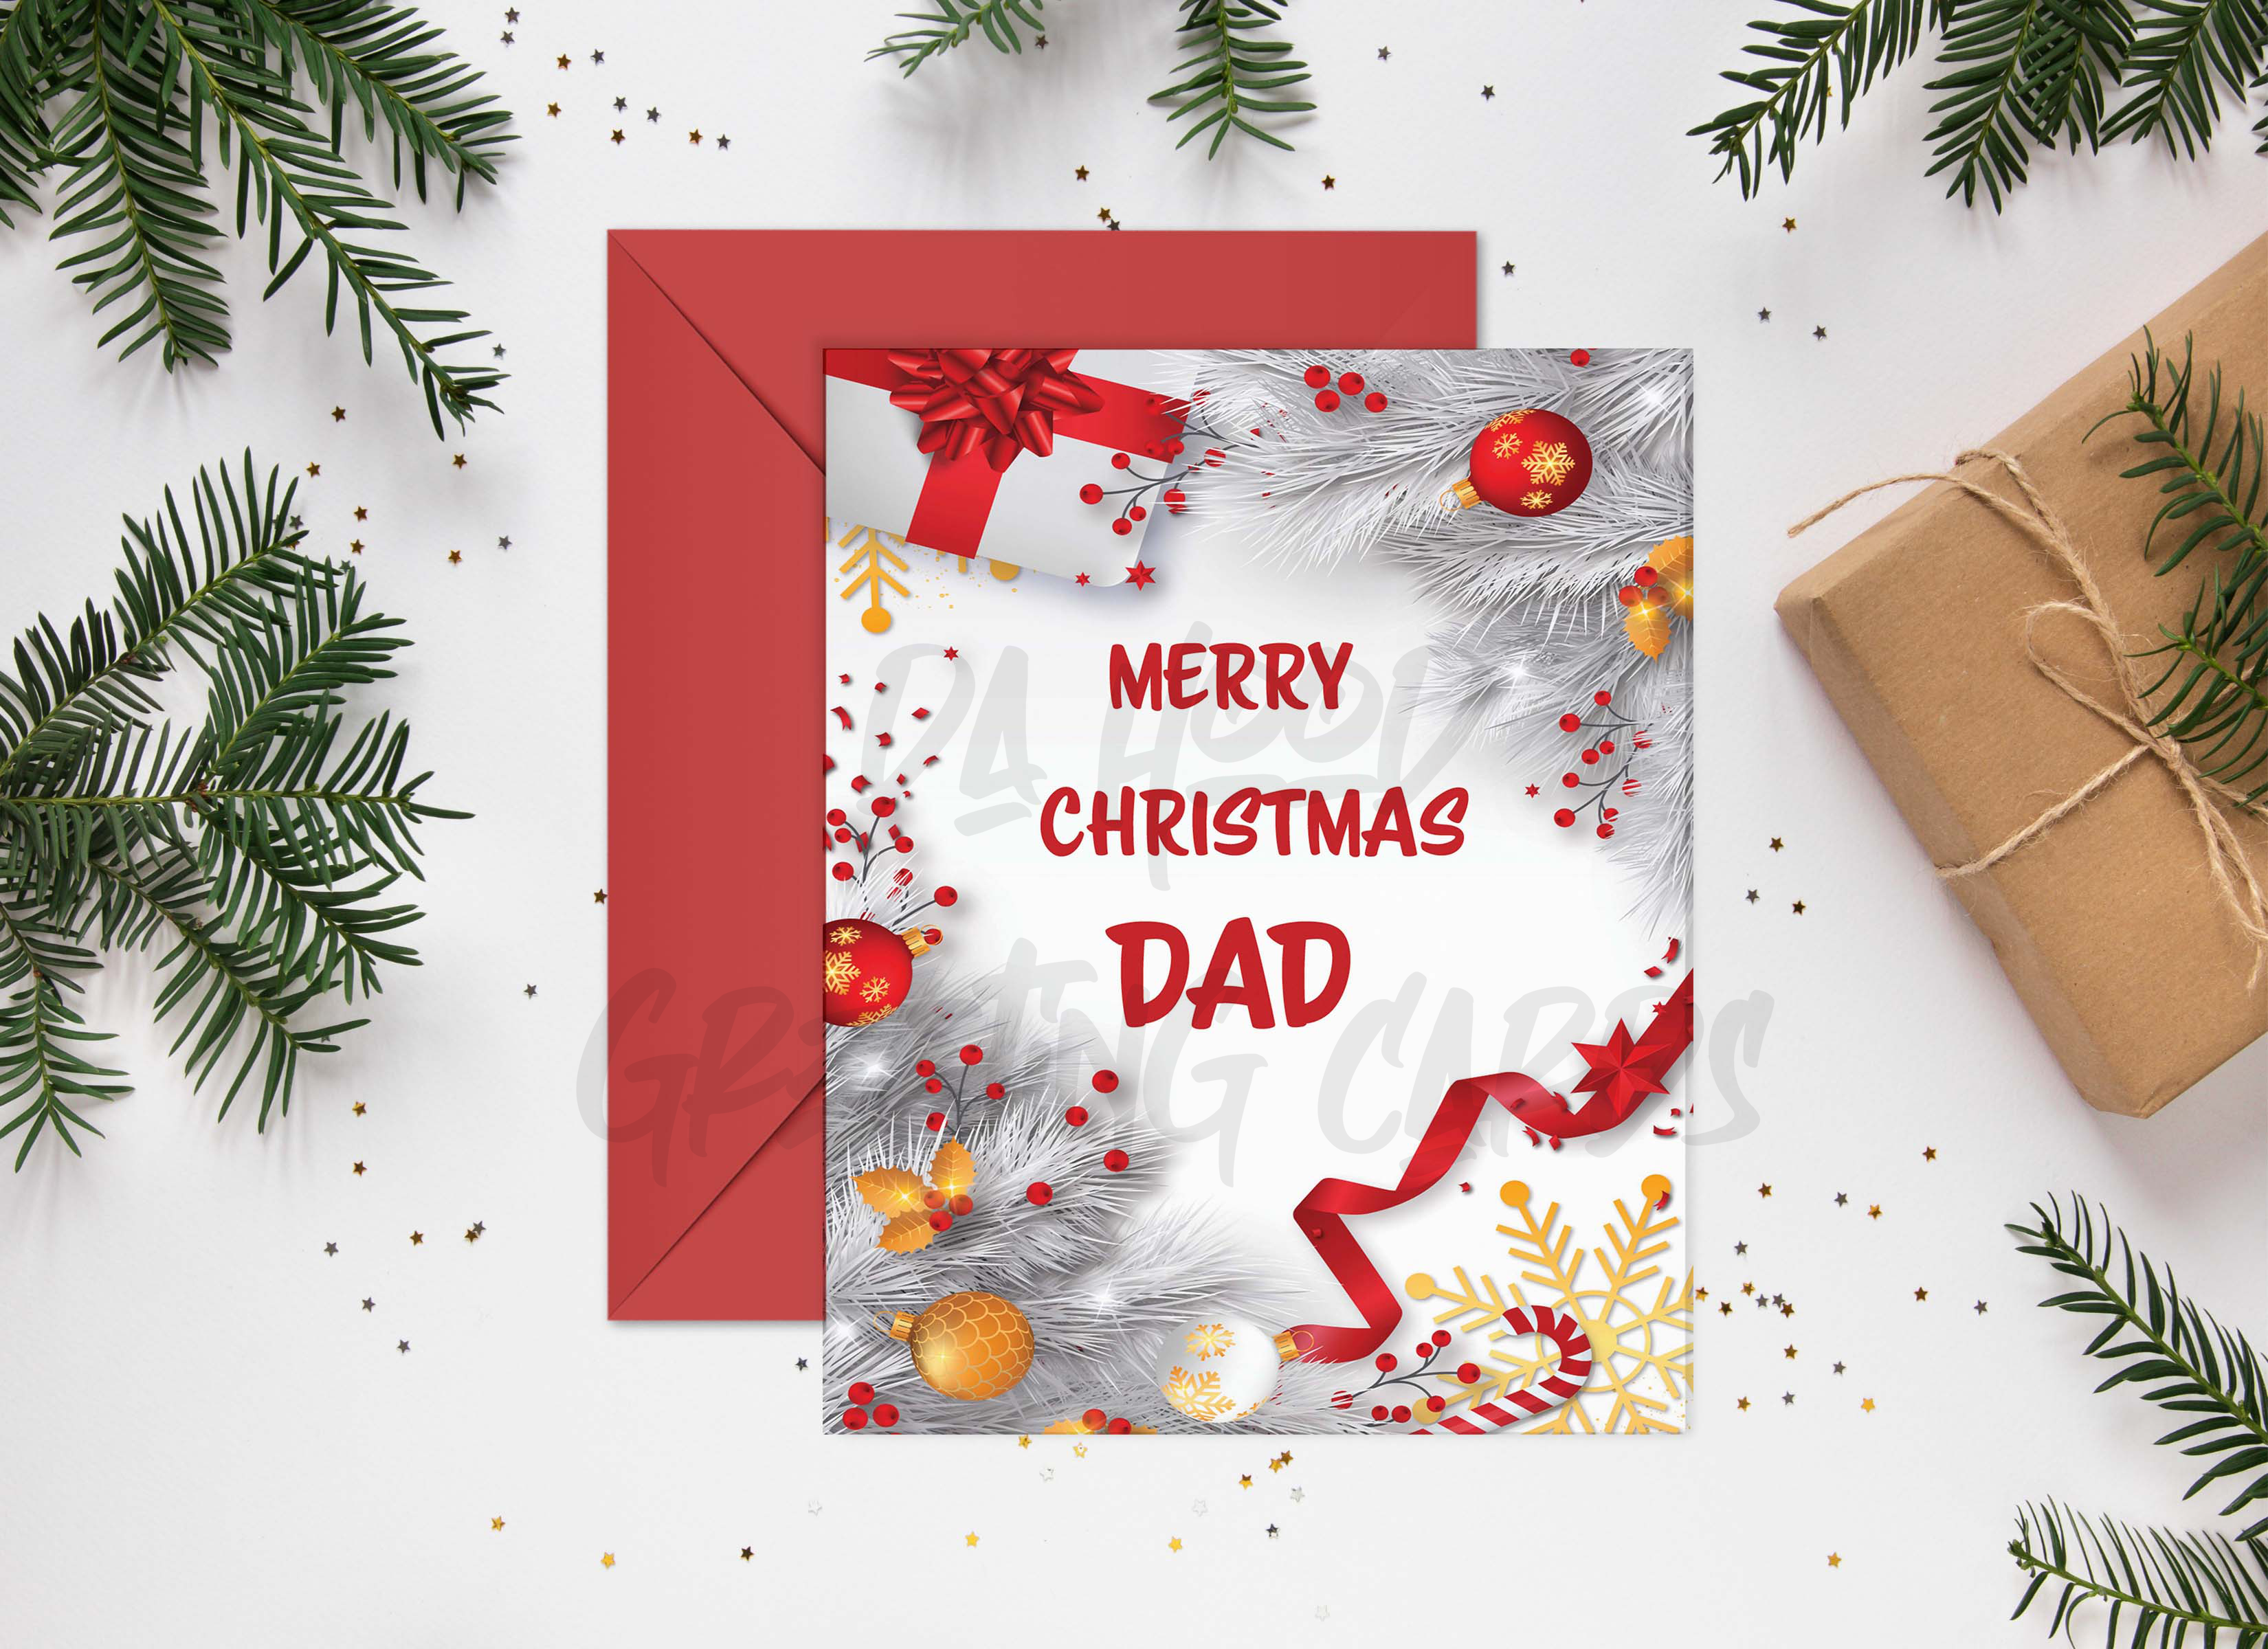 Merry Christmas Card (Dad)